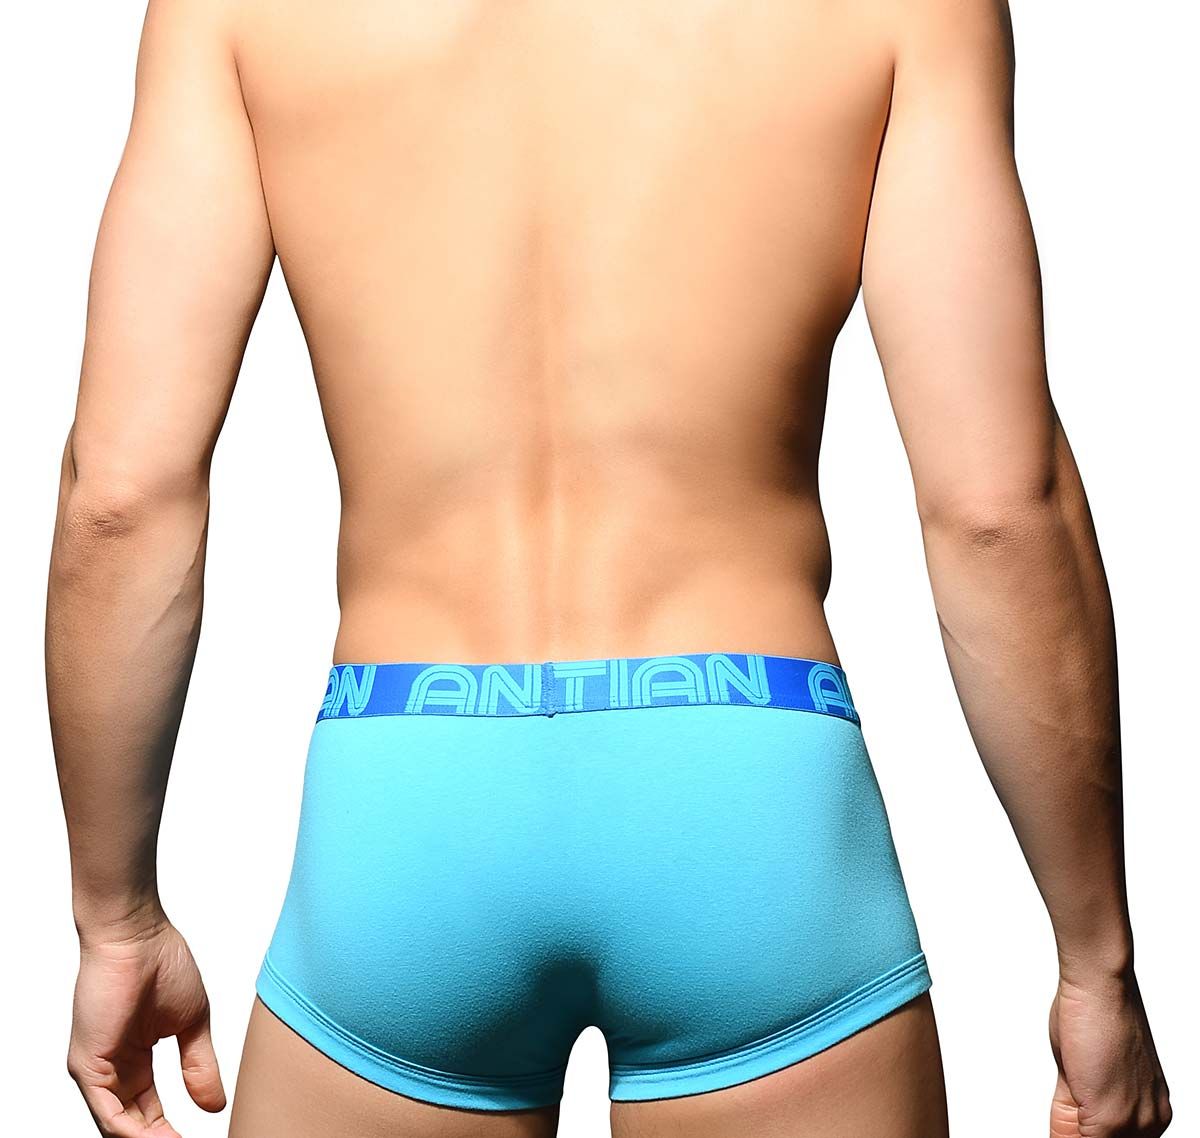 Andrew Christian Boxershorts FLY TAGLESS BOXER w/ ALMOST NAKED 92588, blau